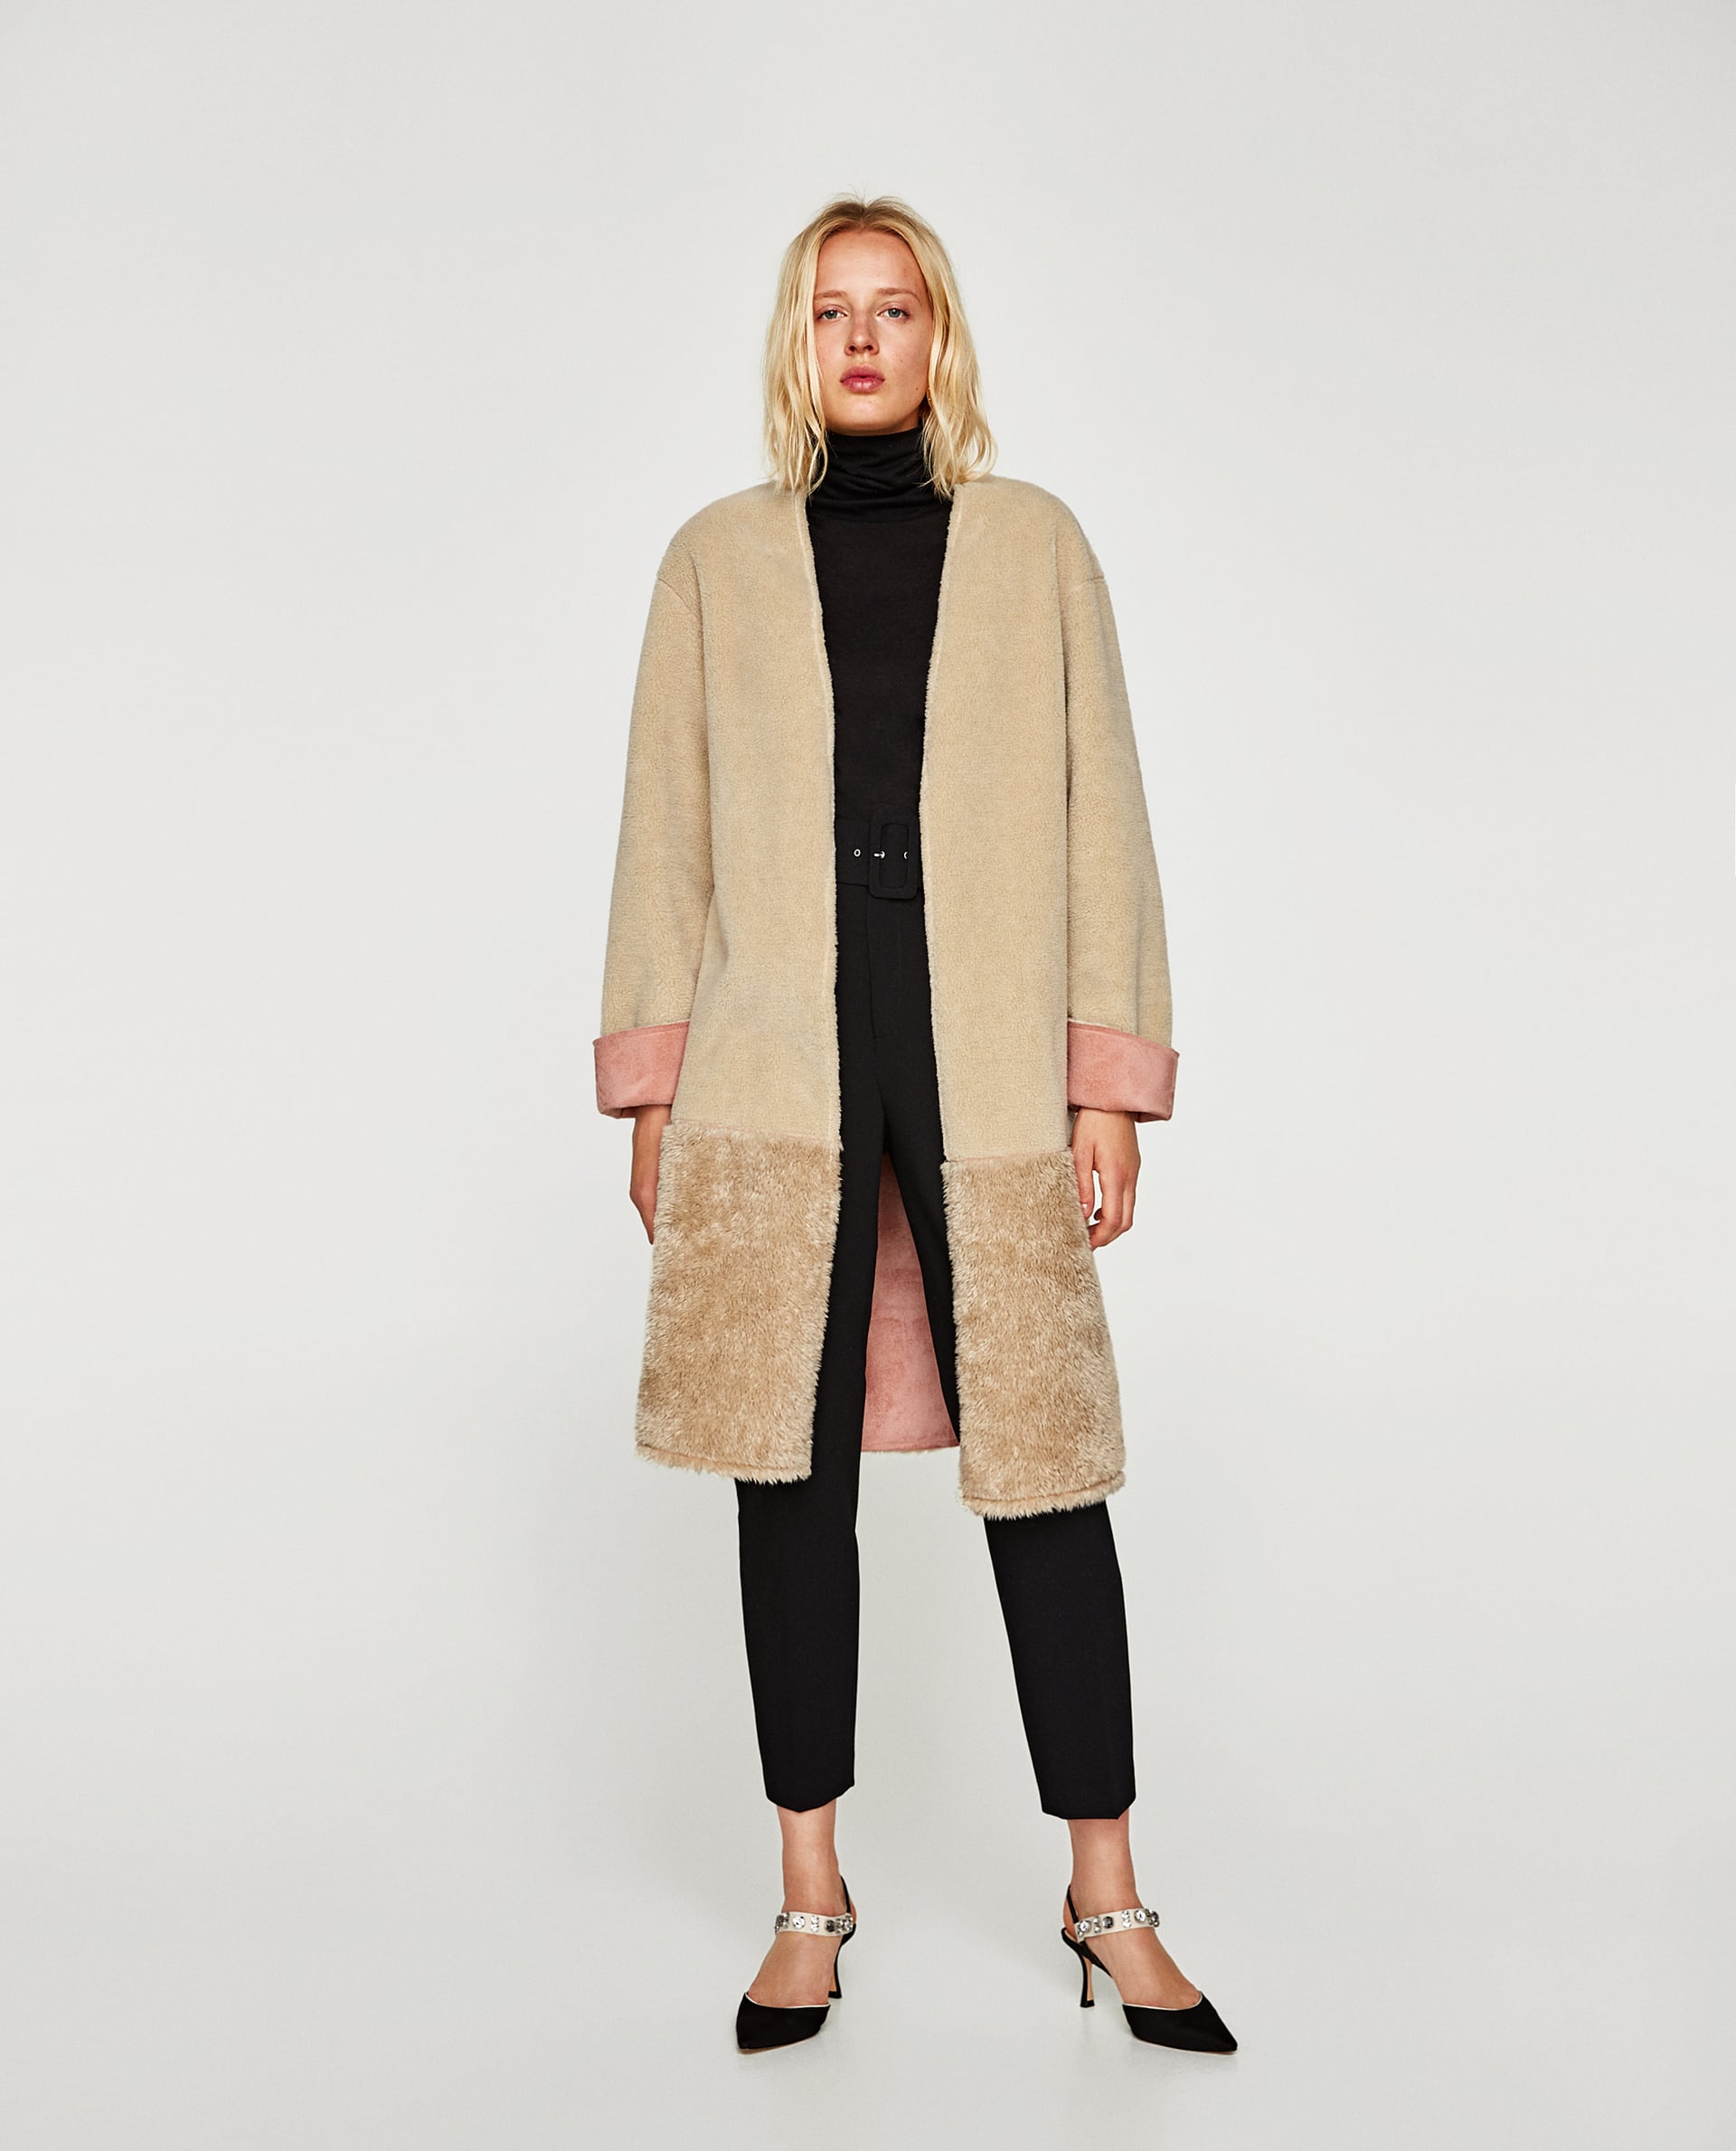 Zara COAT WITH DOUBLE-SIDED EFFECT at £69.99 | love the brands